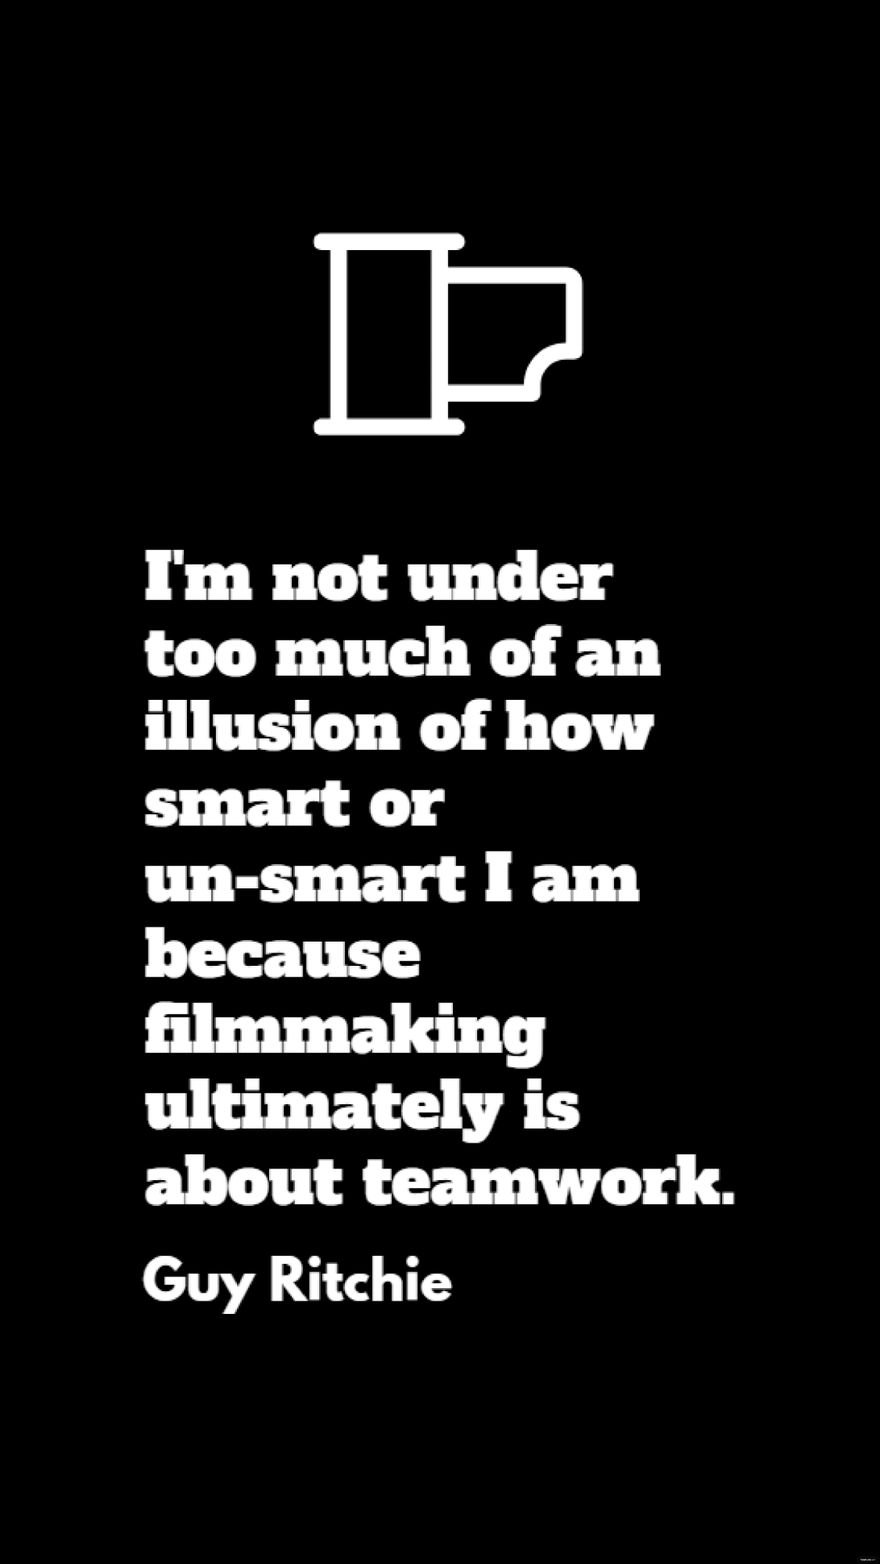 Guy Ritchie - I'm not under too much of an illusion of how smart or un-smart I am because filmmaking ultimately is about teamwork. in JPG